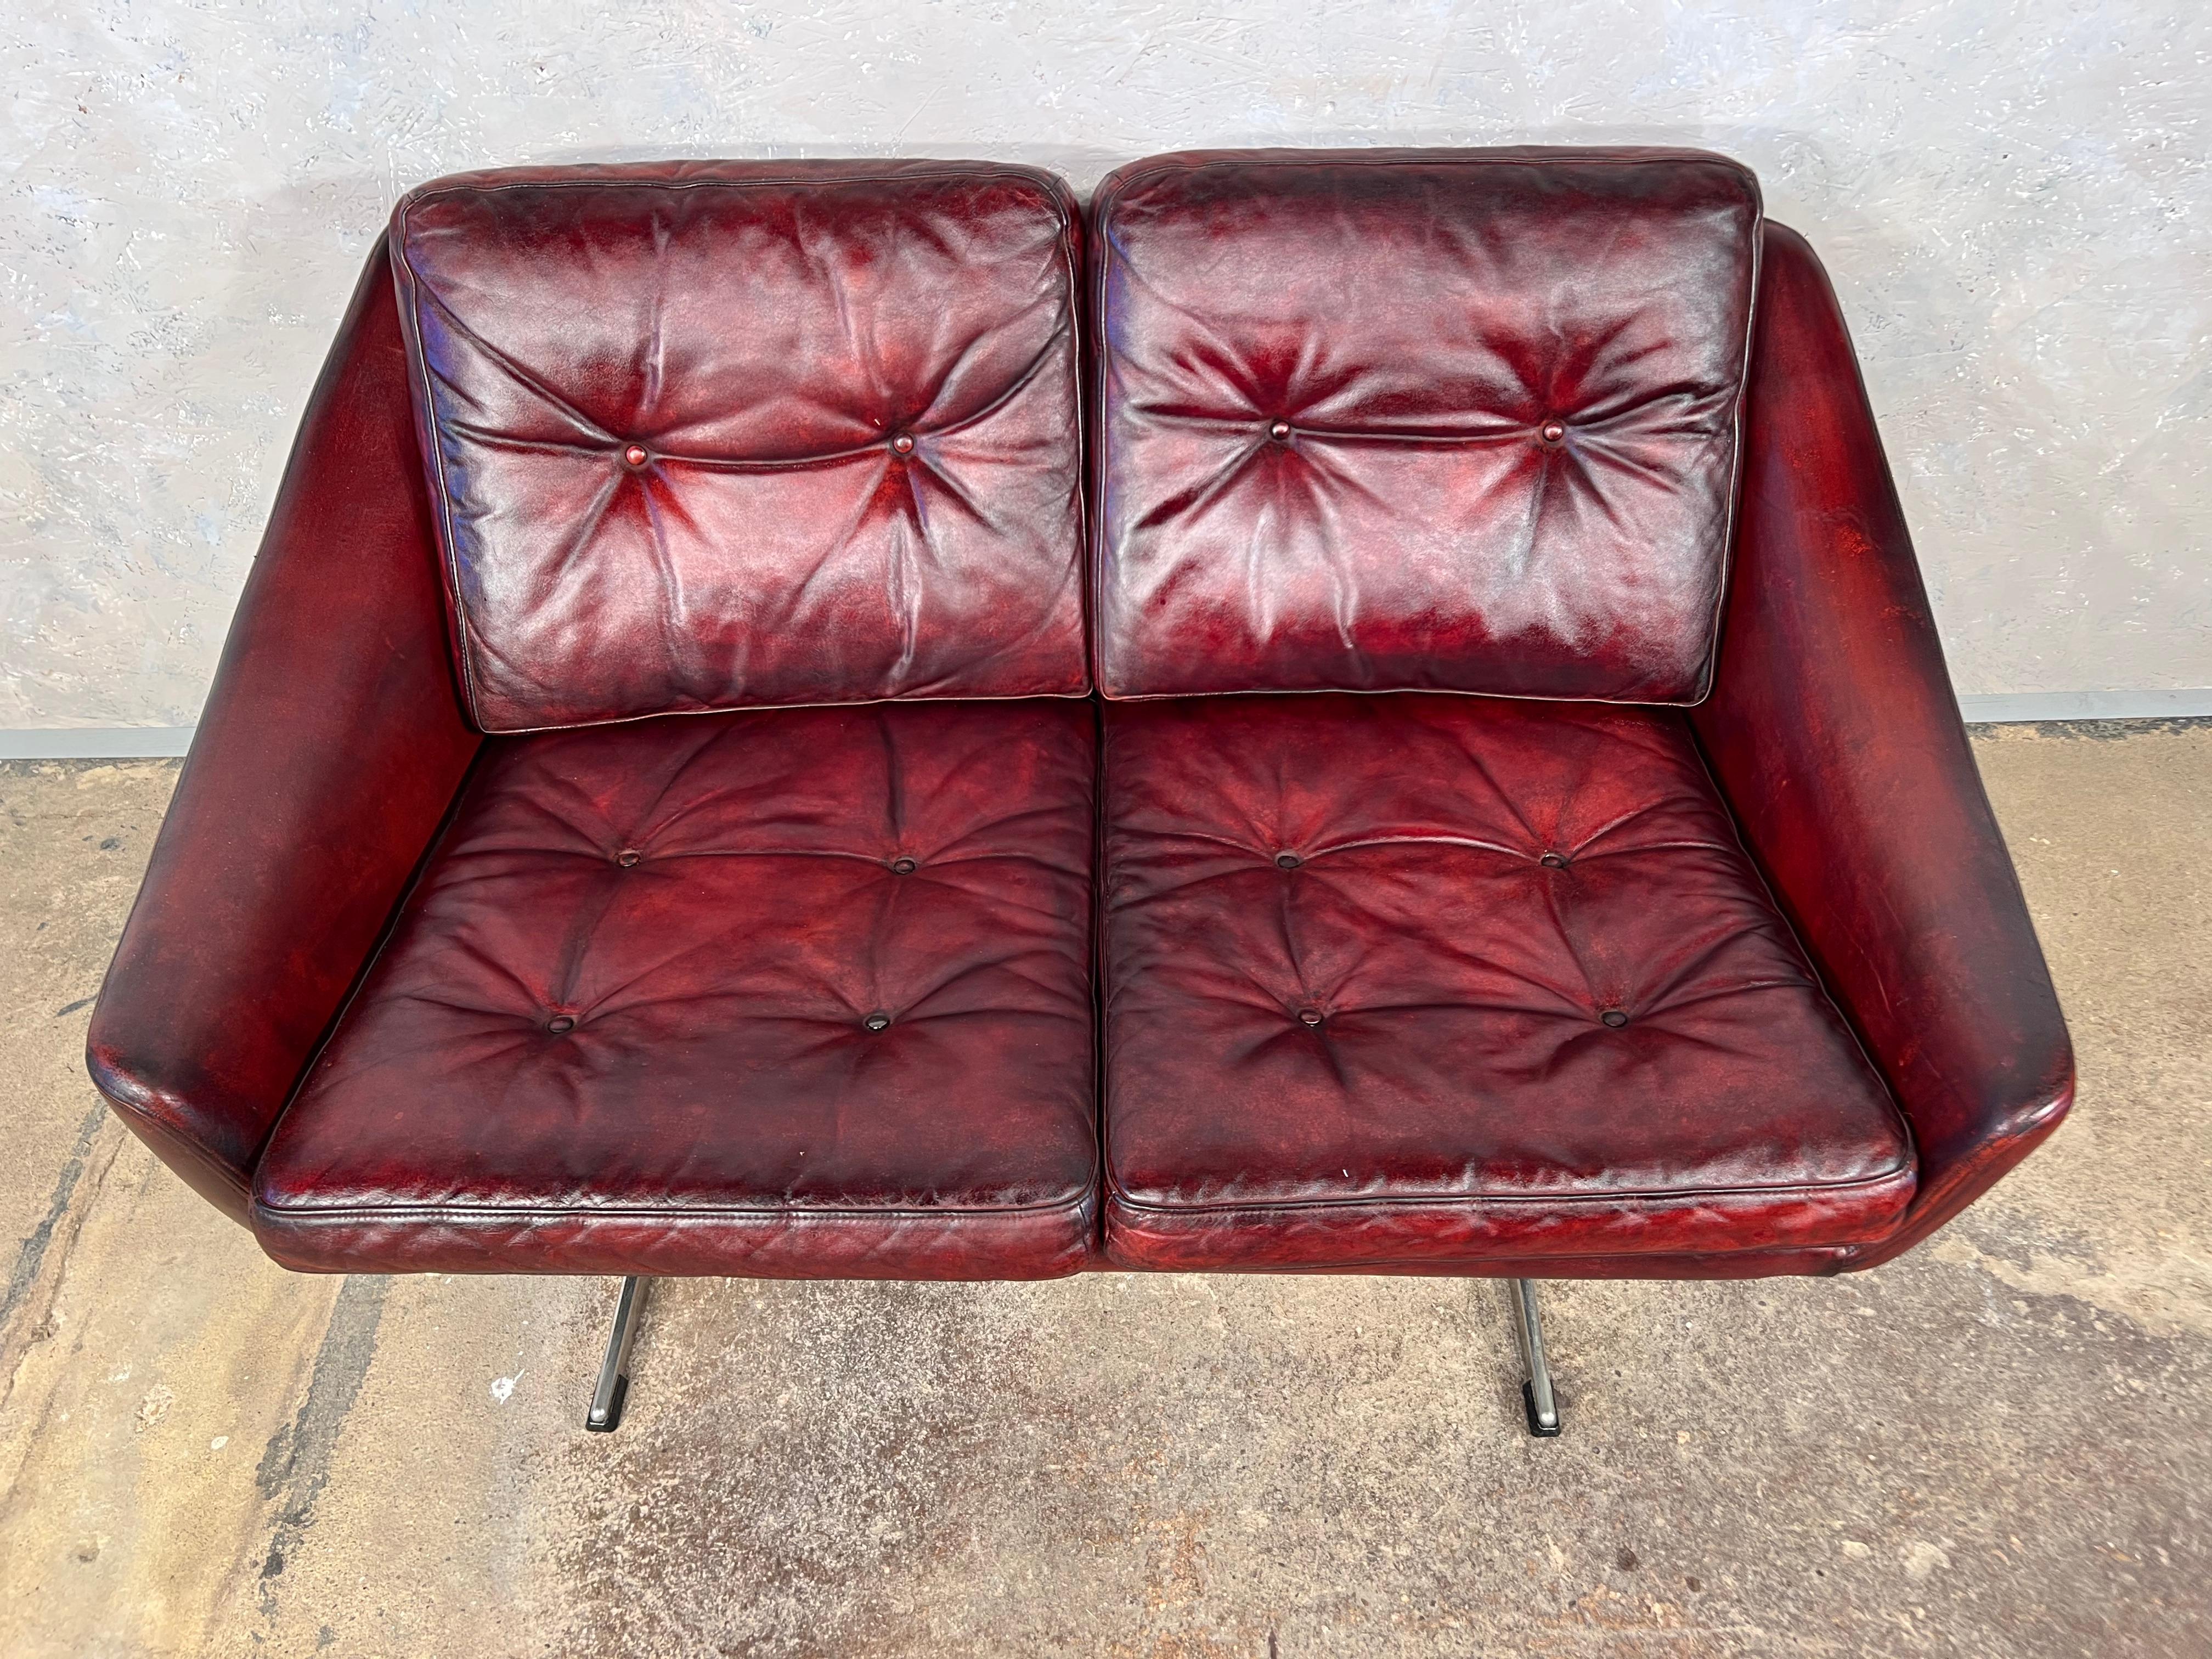 A Vintage Danish 70s two seater leather sofa.

A Very compact Two seater, great design and shape, with a fantastic hand dyed patinated chestnut colour, hand polished and restored.

In excellent vintage restored condition.

Viewings welcome at